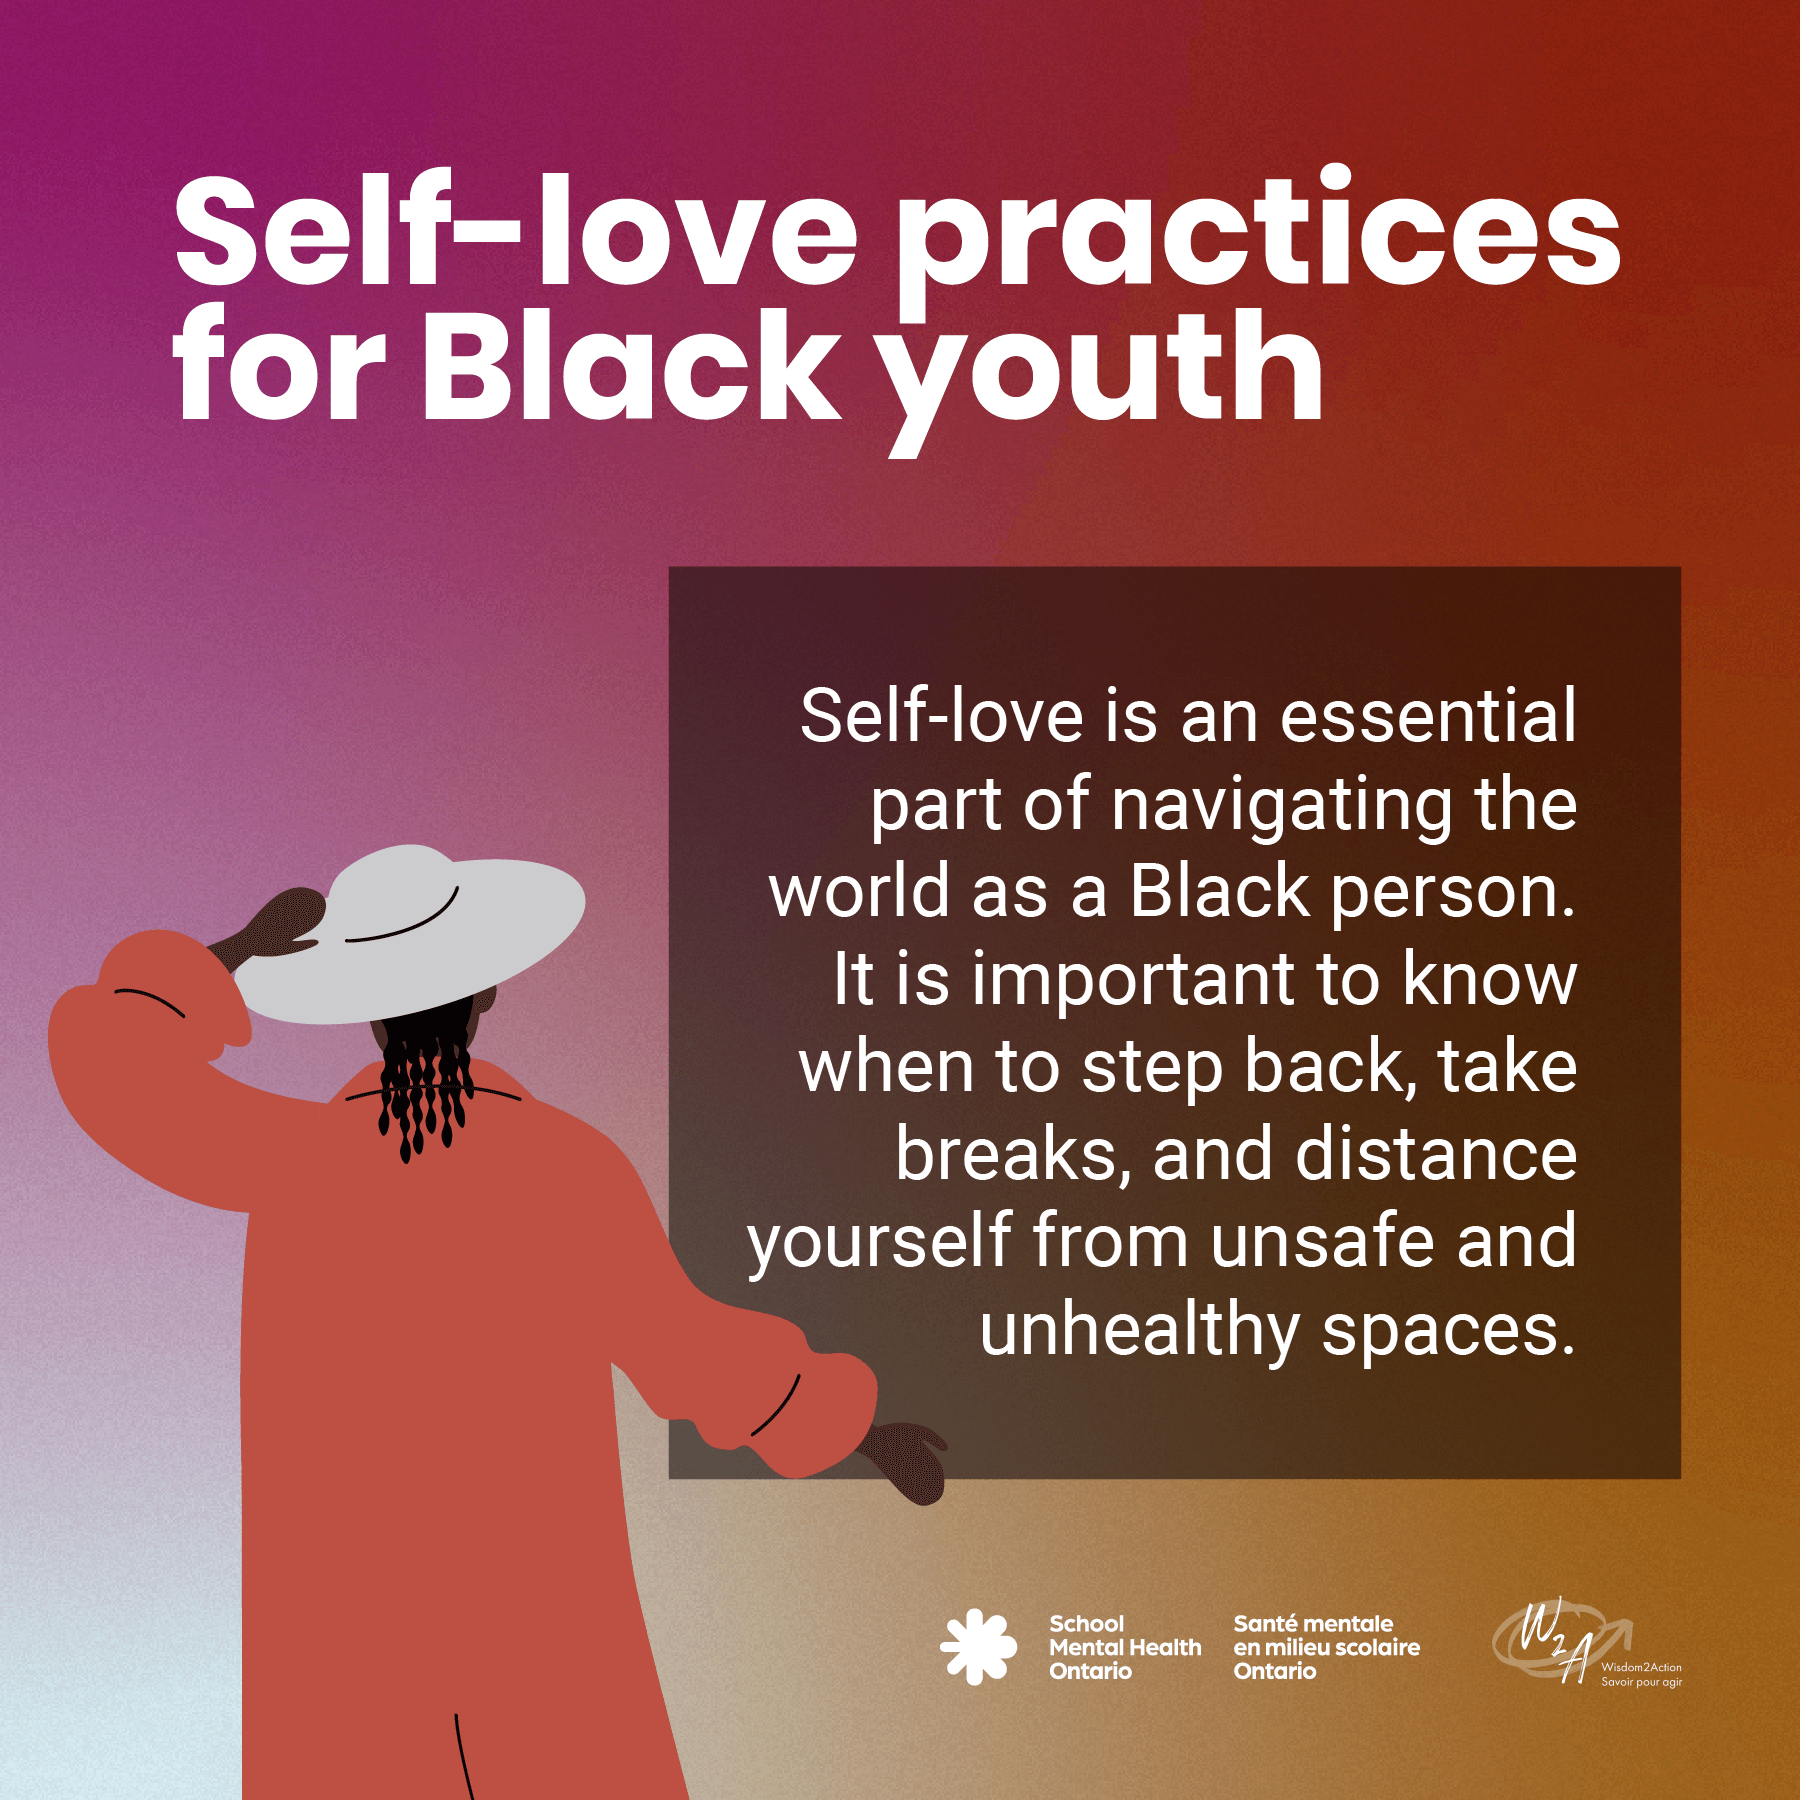 Self-love practices for Black youth - see full description of image below.